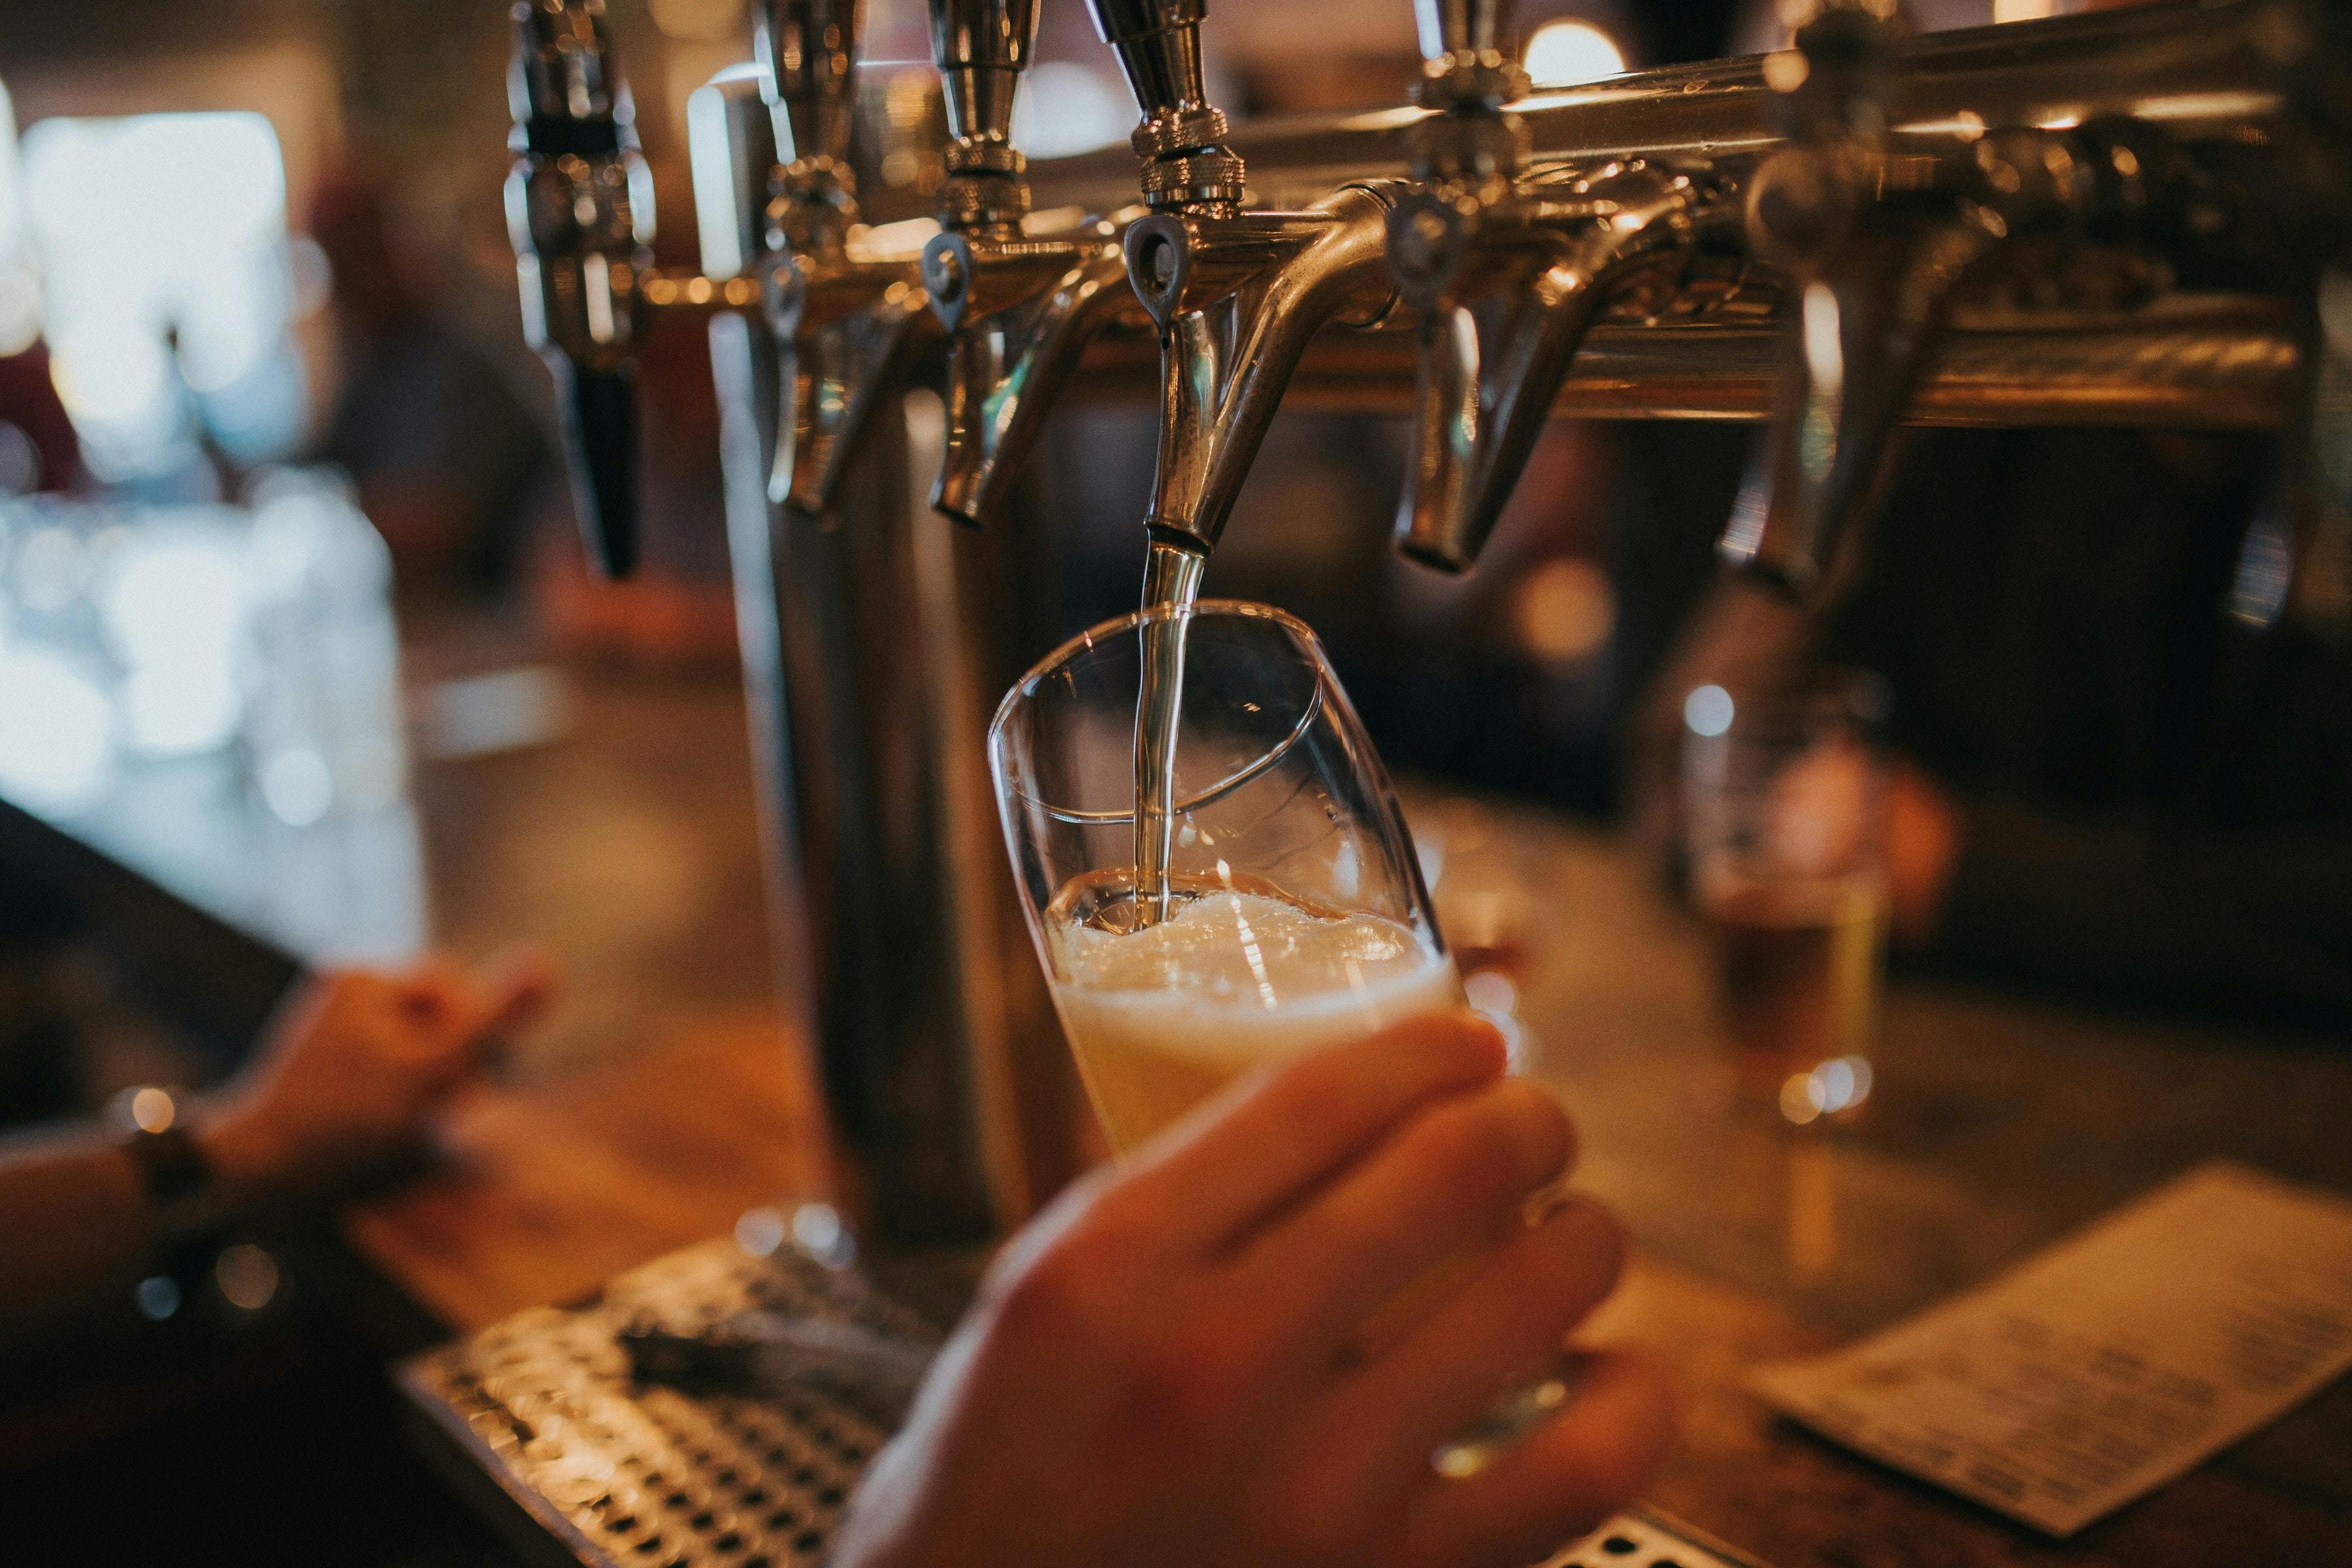 Photograph of someone pouring a draught pint of beer.